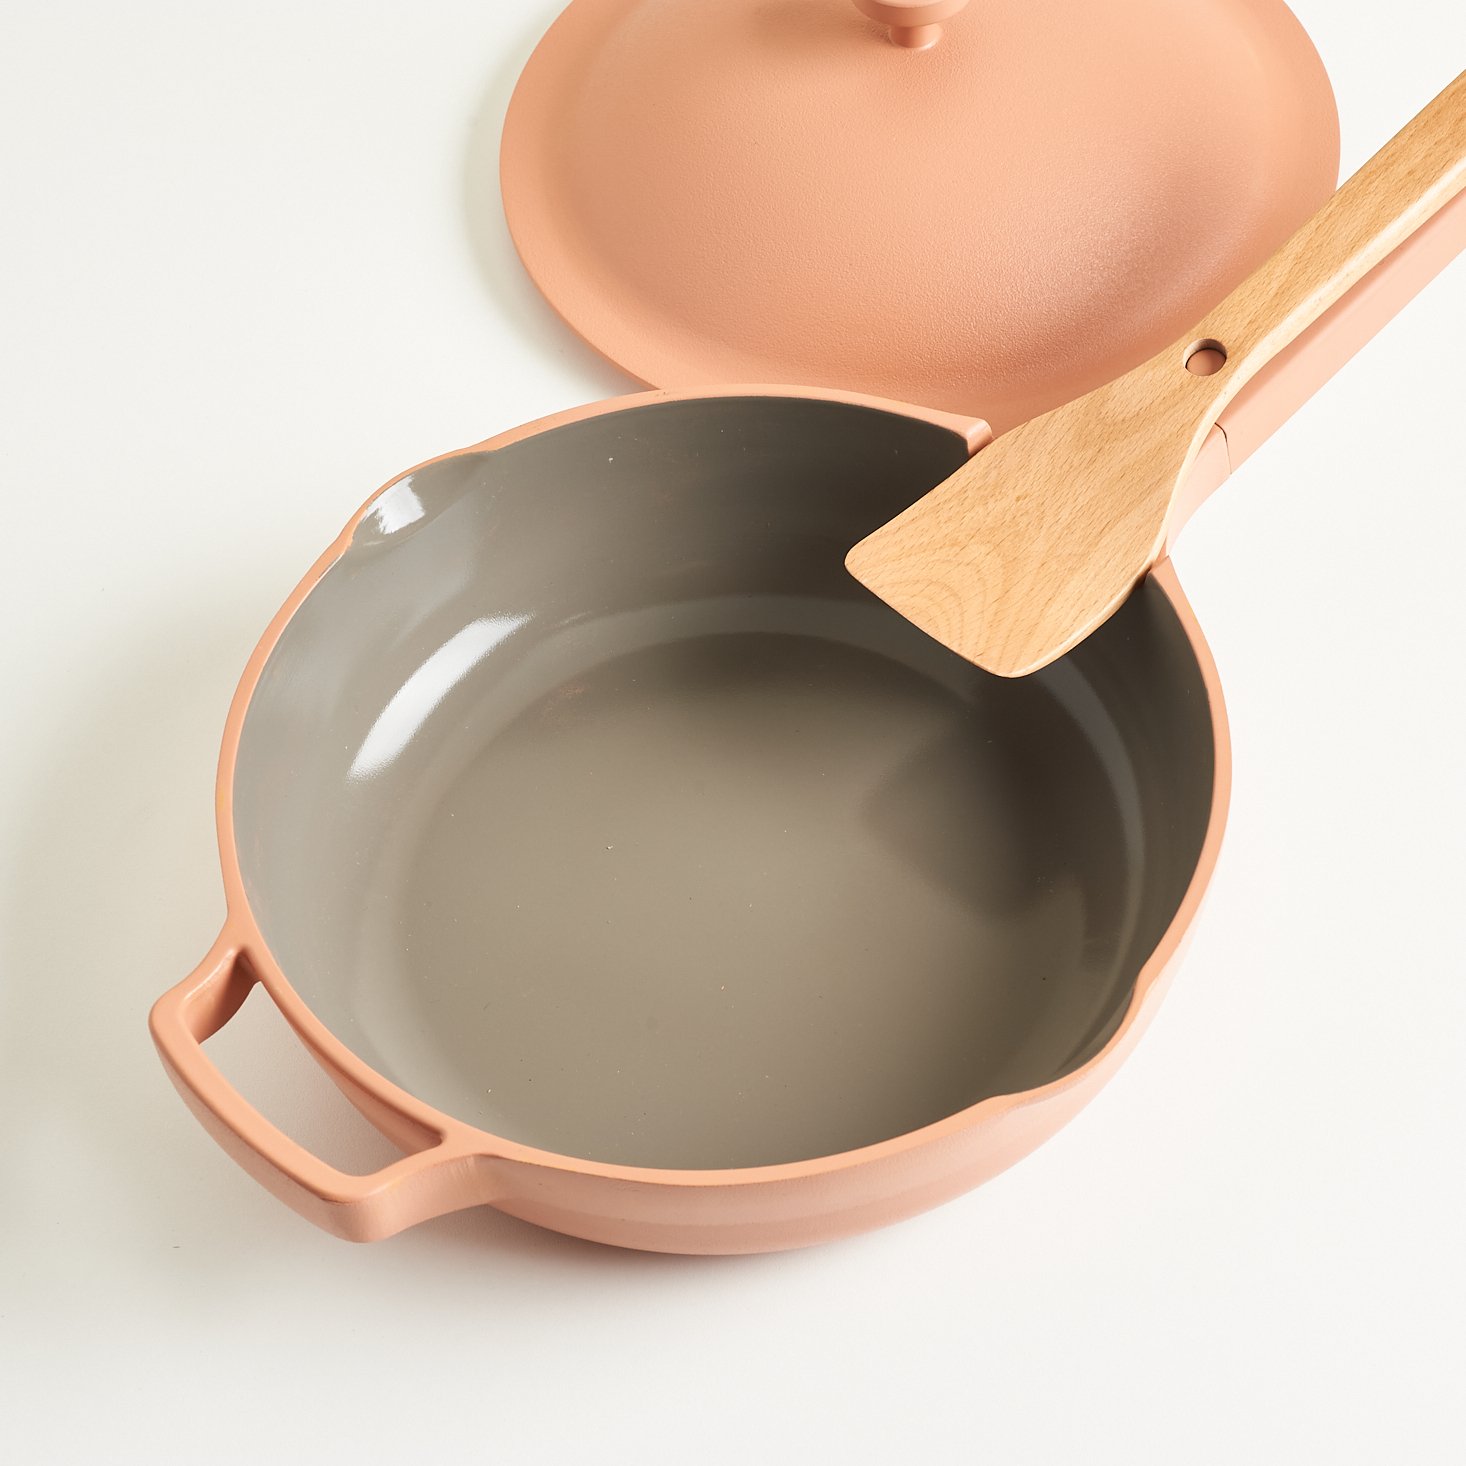 The Always Pan From Our Place Is Designed to Replace All of Your